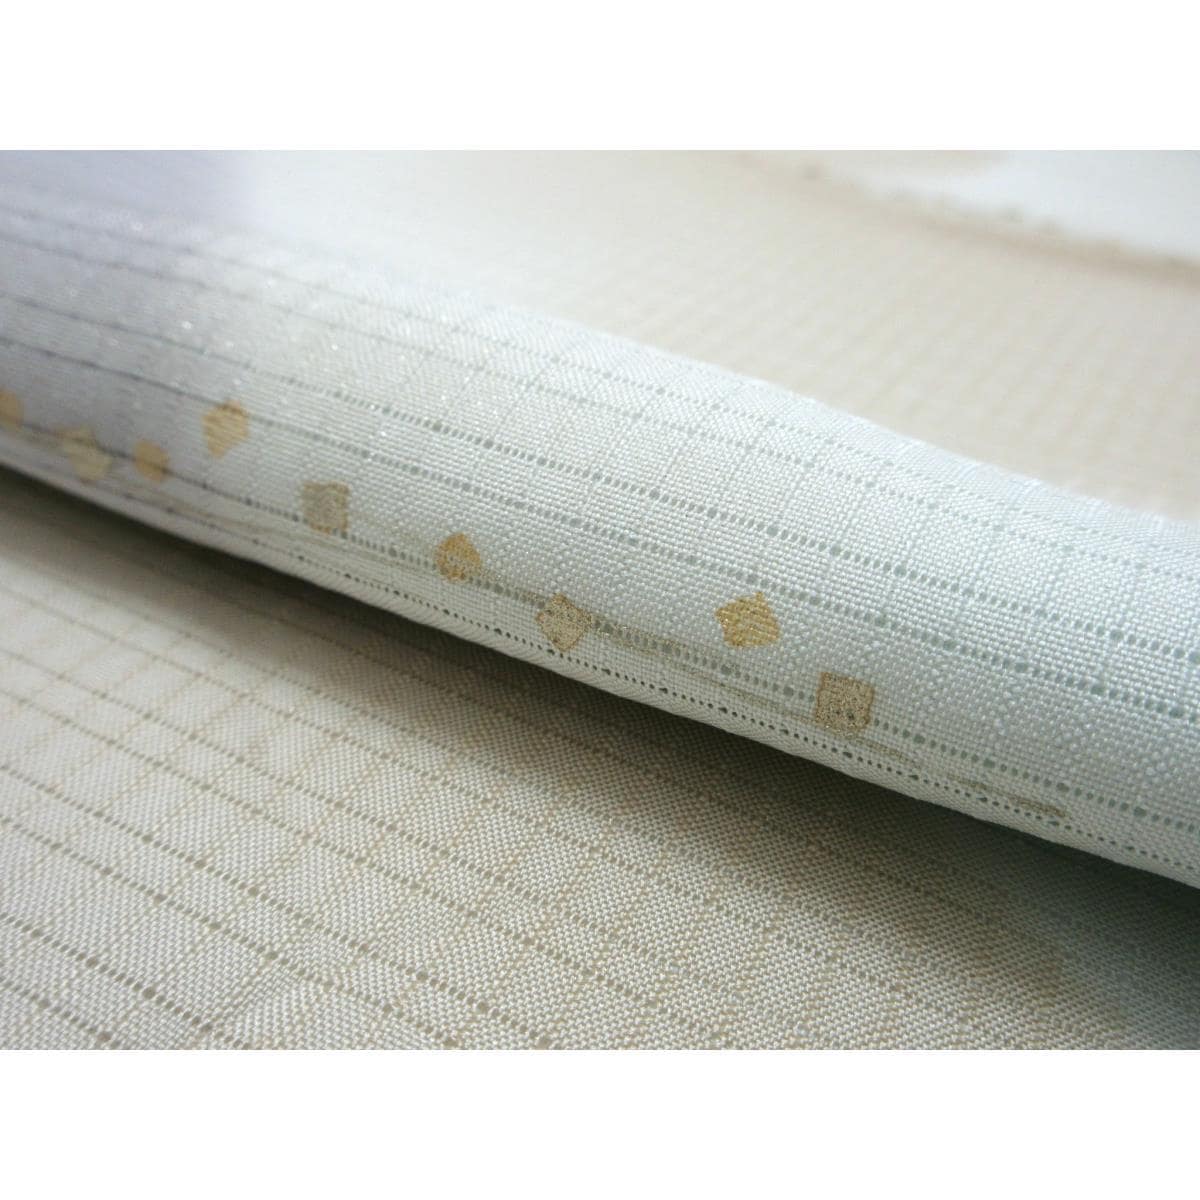 [BRAND NEW] Single layer visiting kimono with gold leaf finish and gradation dyeing